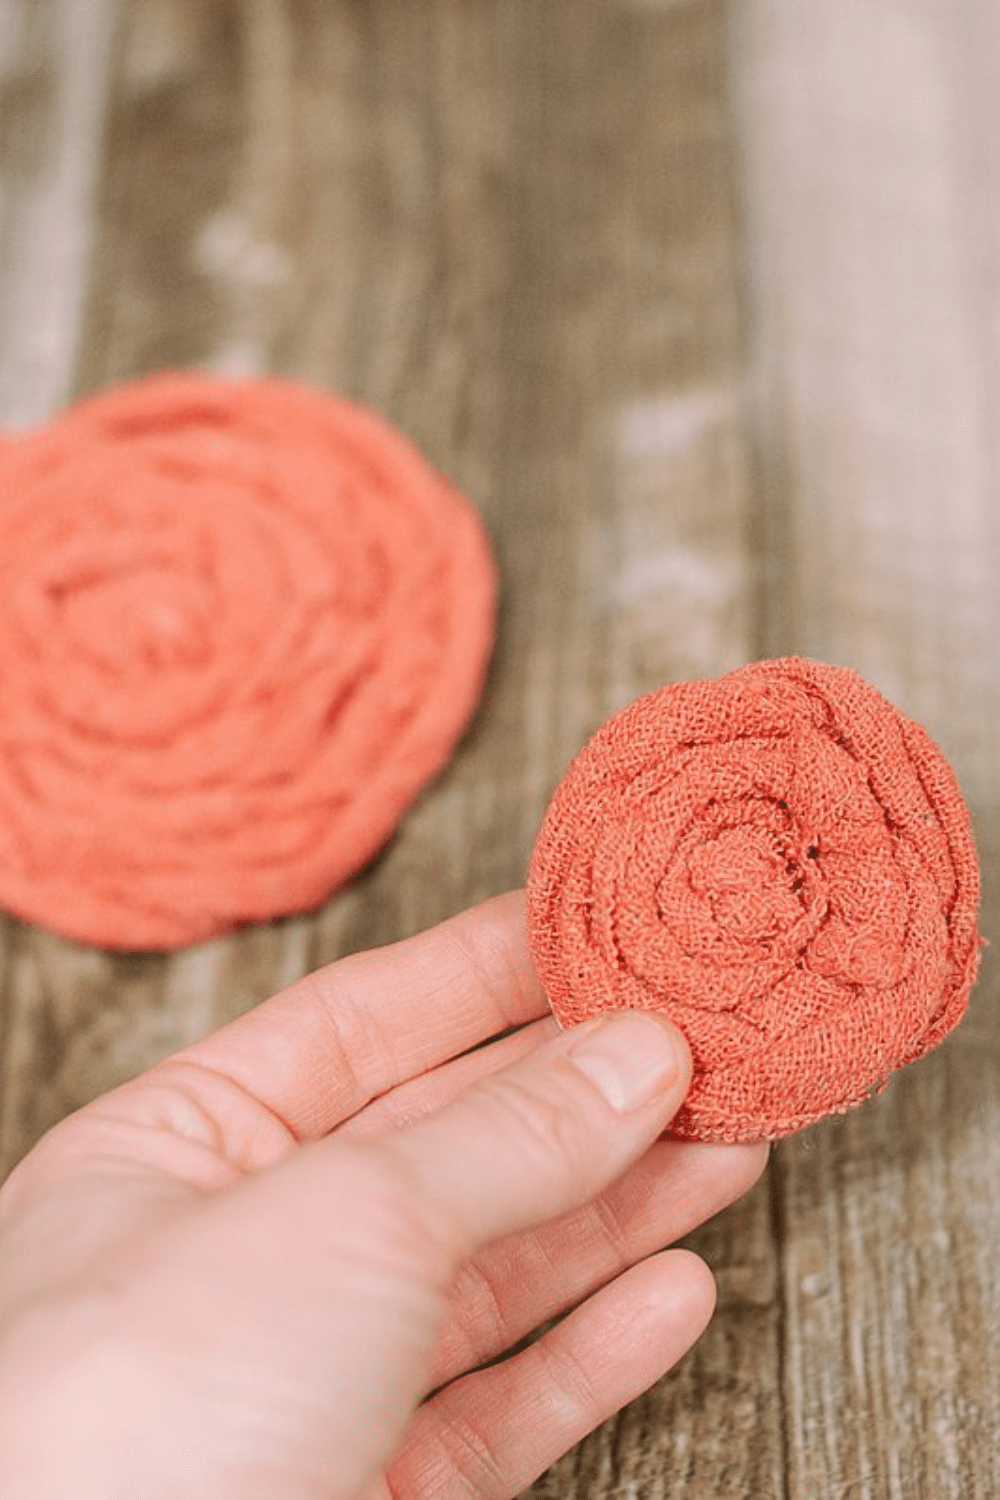 How to Make Fabric Rosettes from Shop Towels